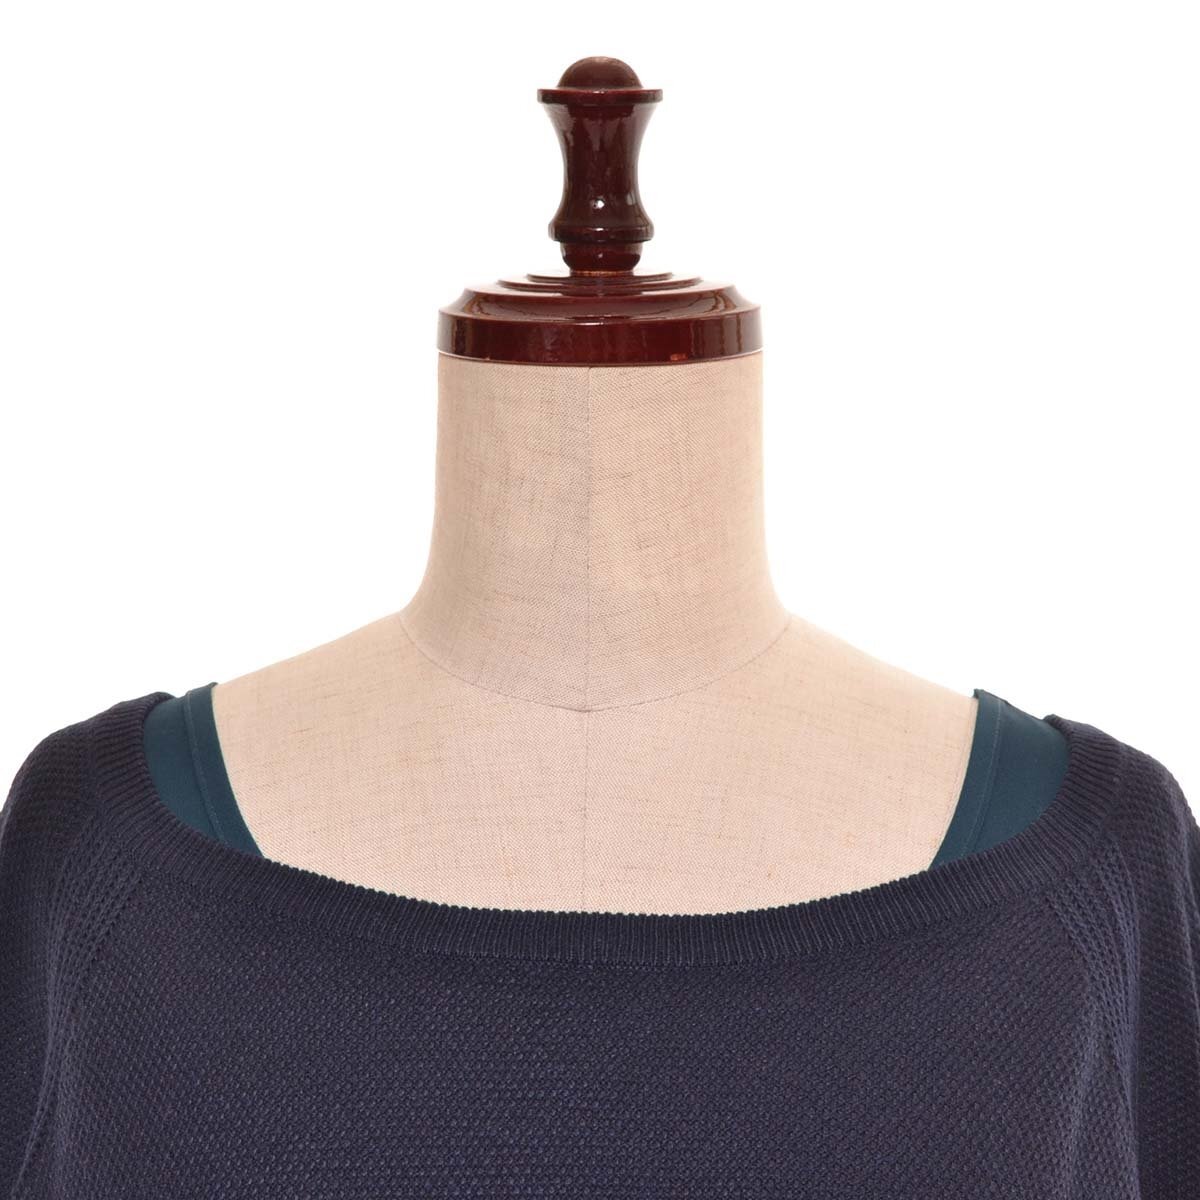 *502557 AS KNOW AS olaca As Know As o Ora ka.... size * sweater tank top knitted size 15 lady's navy 